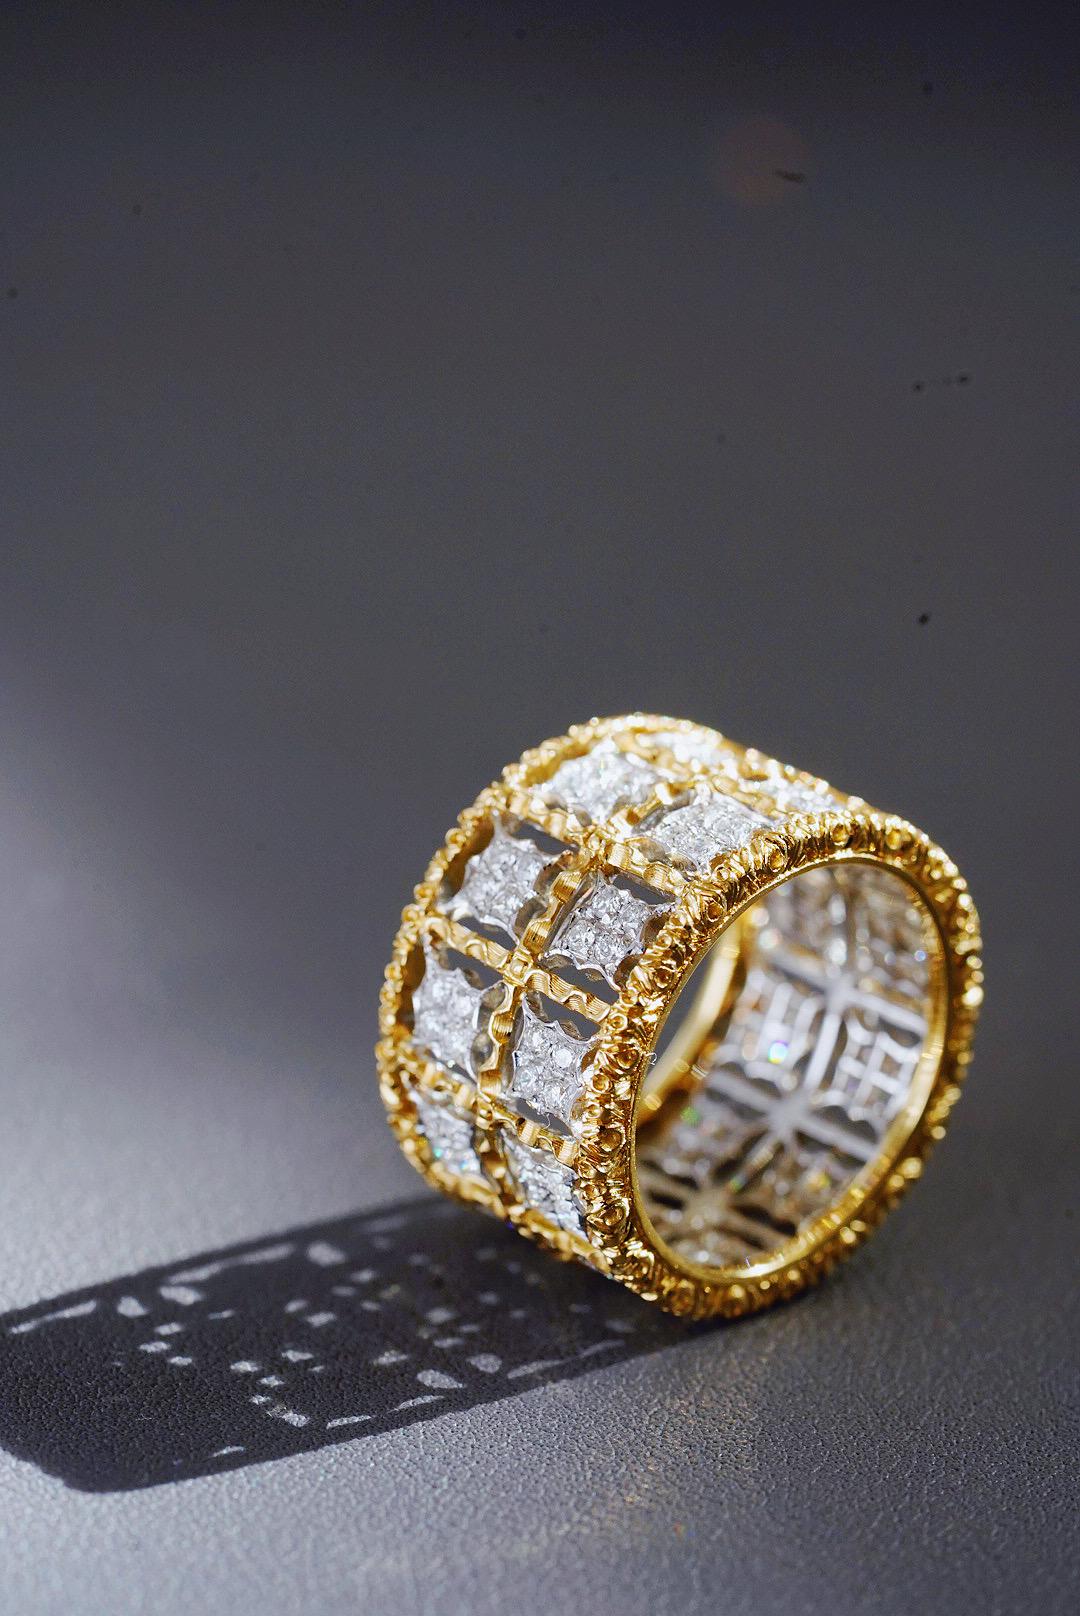 Mario Buccellati exemplifies the highest level of Italian craftsmanship and this vintage diamond band ring is of unsurpassed aesthetic beauty and classic distinction. It is crafted in fine 18K yellow gold with white gold.

Having been inspired by